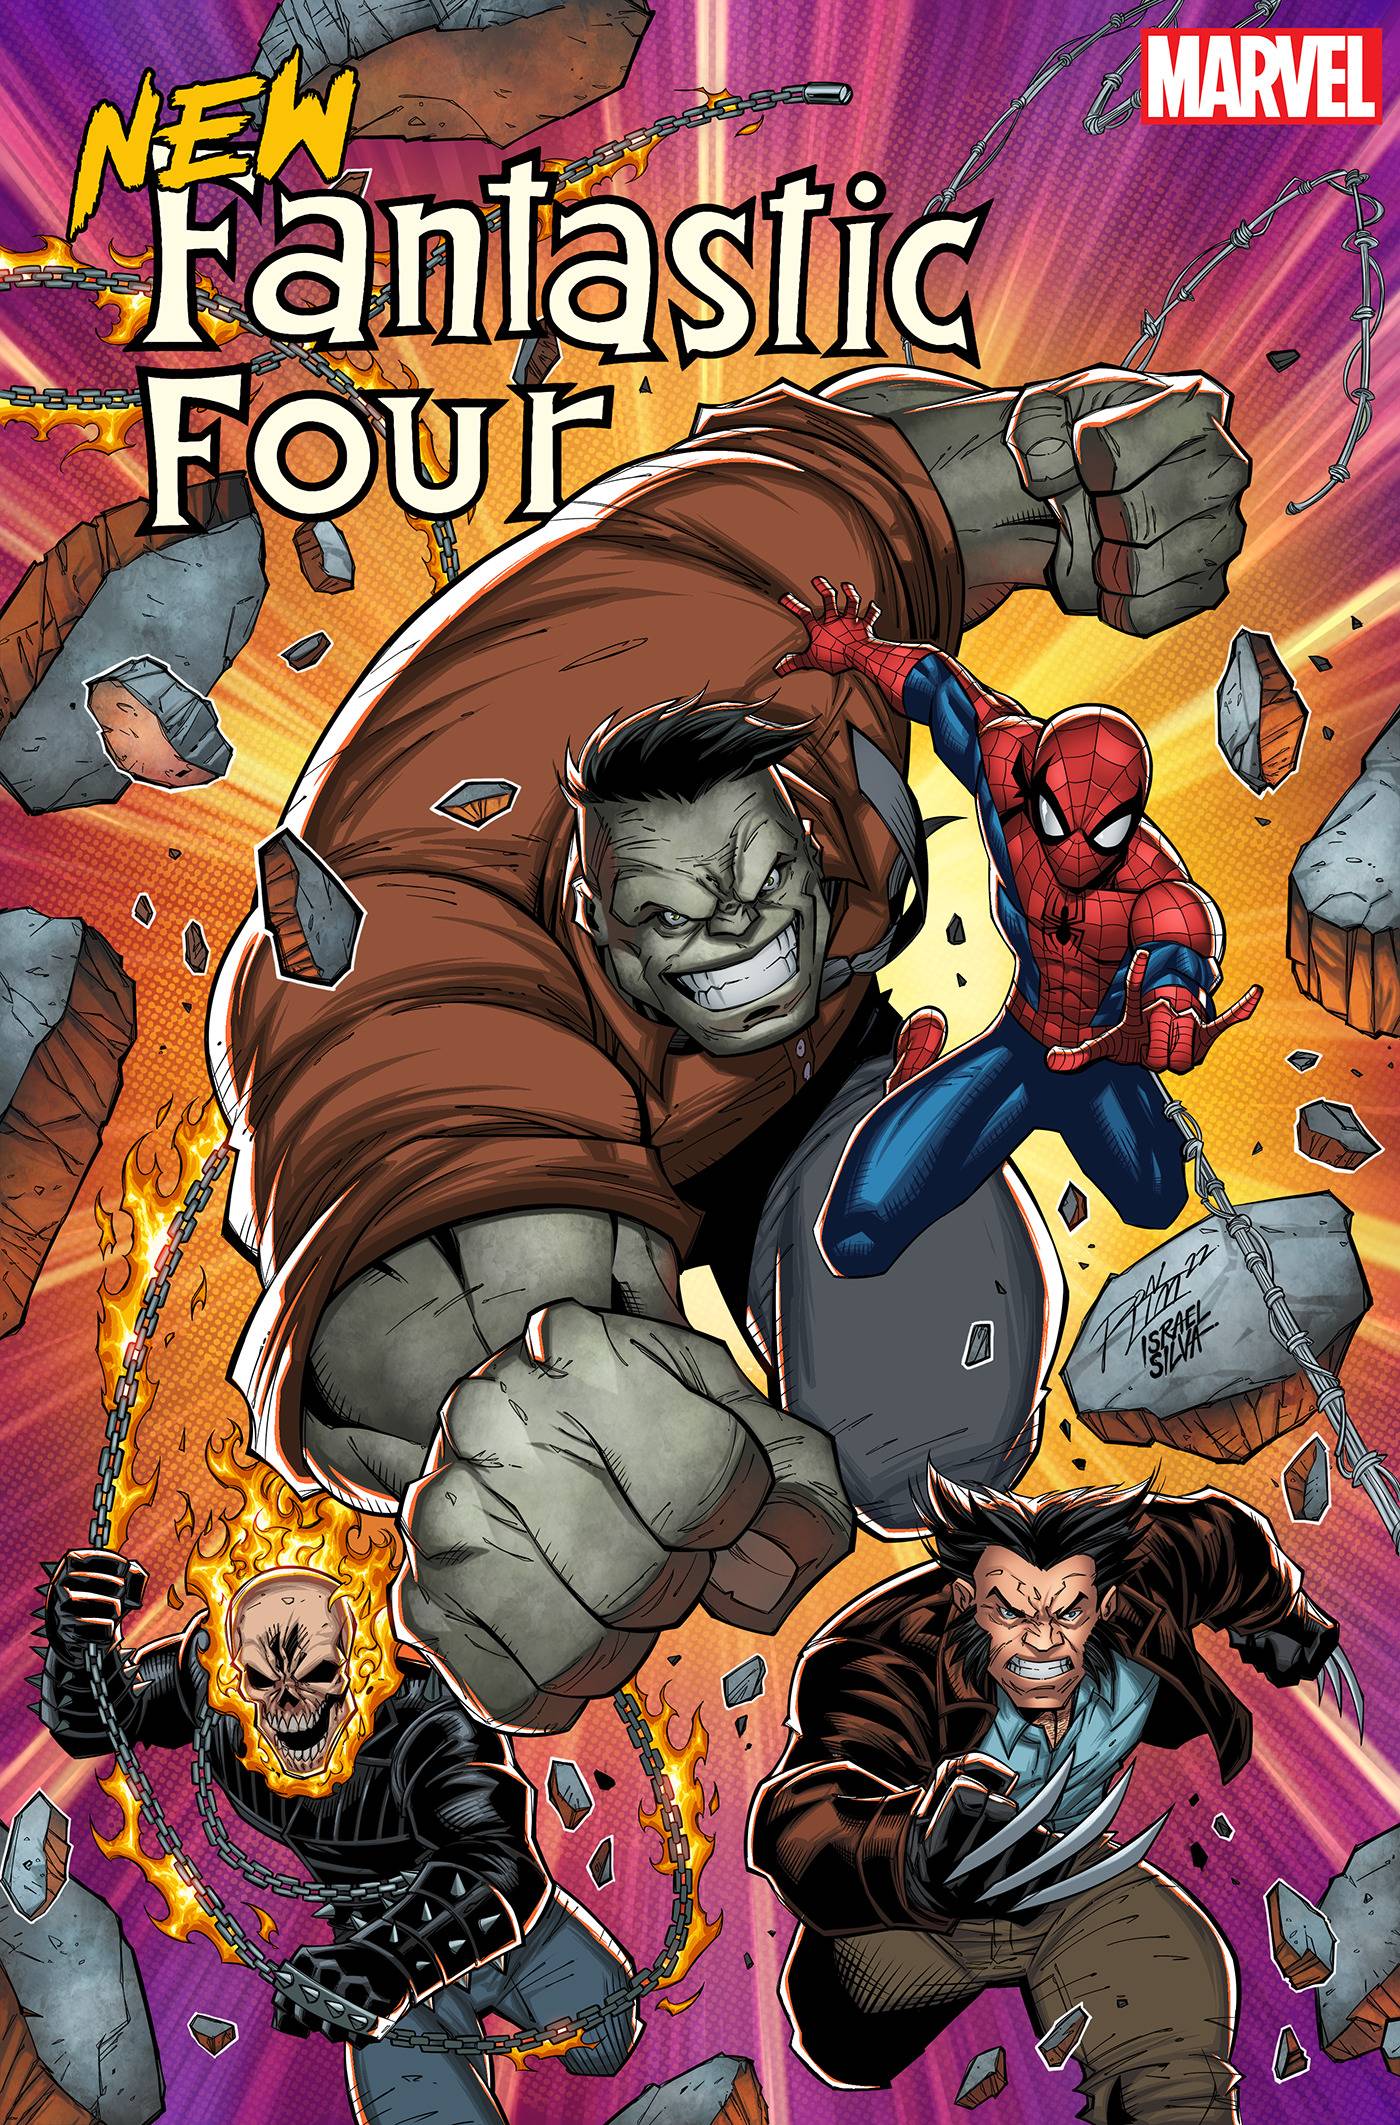 NEW FANTASTIC FOUR #1 (OF 5)